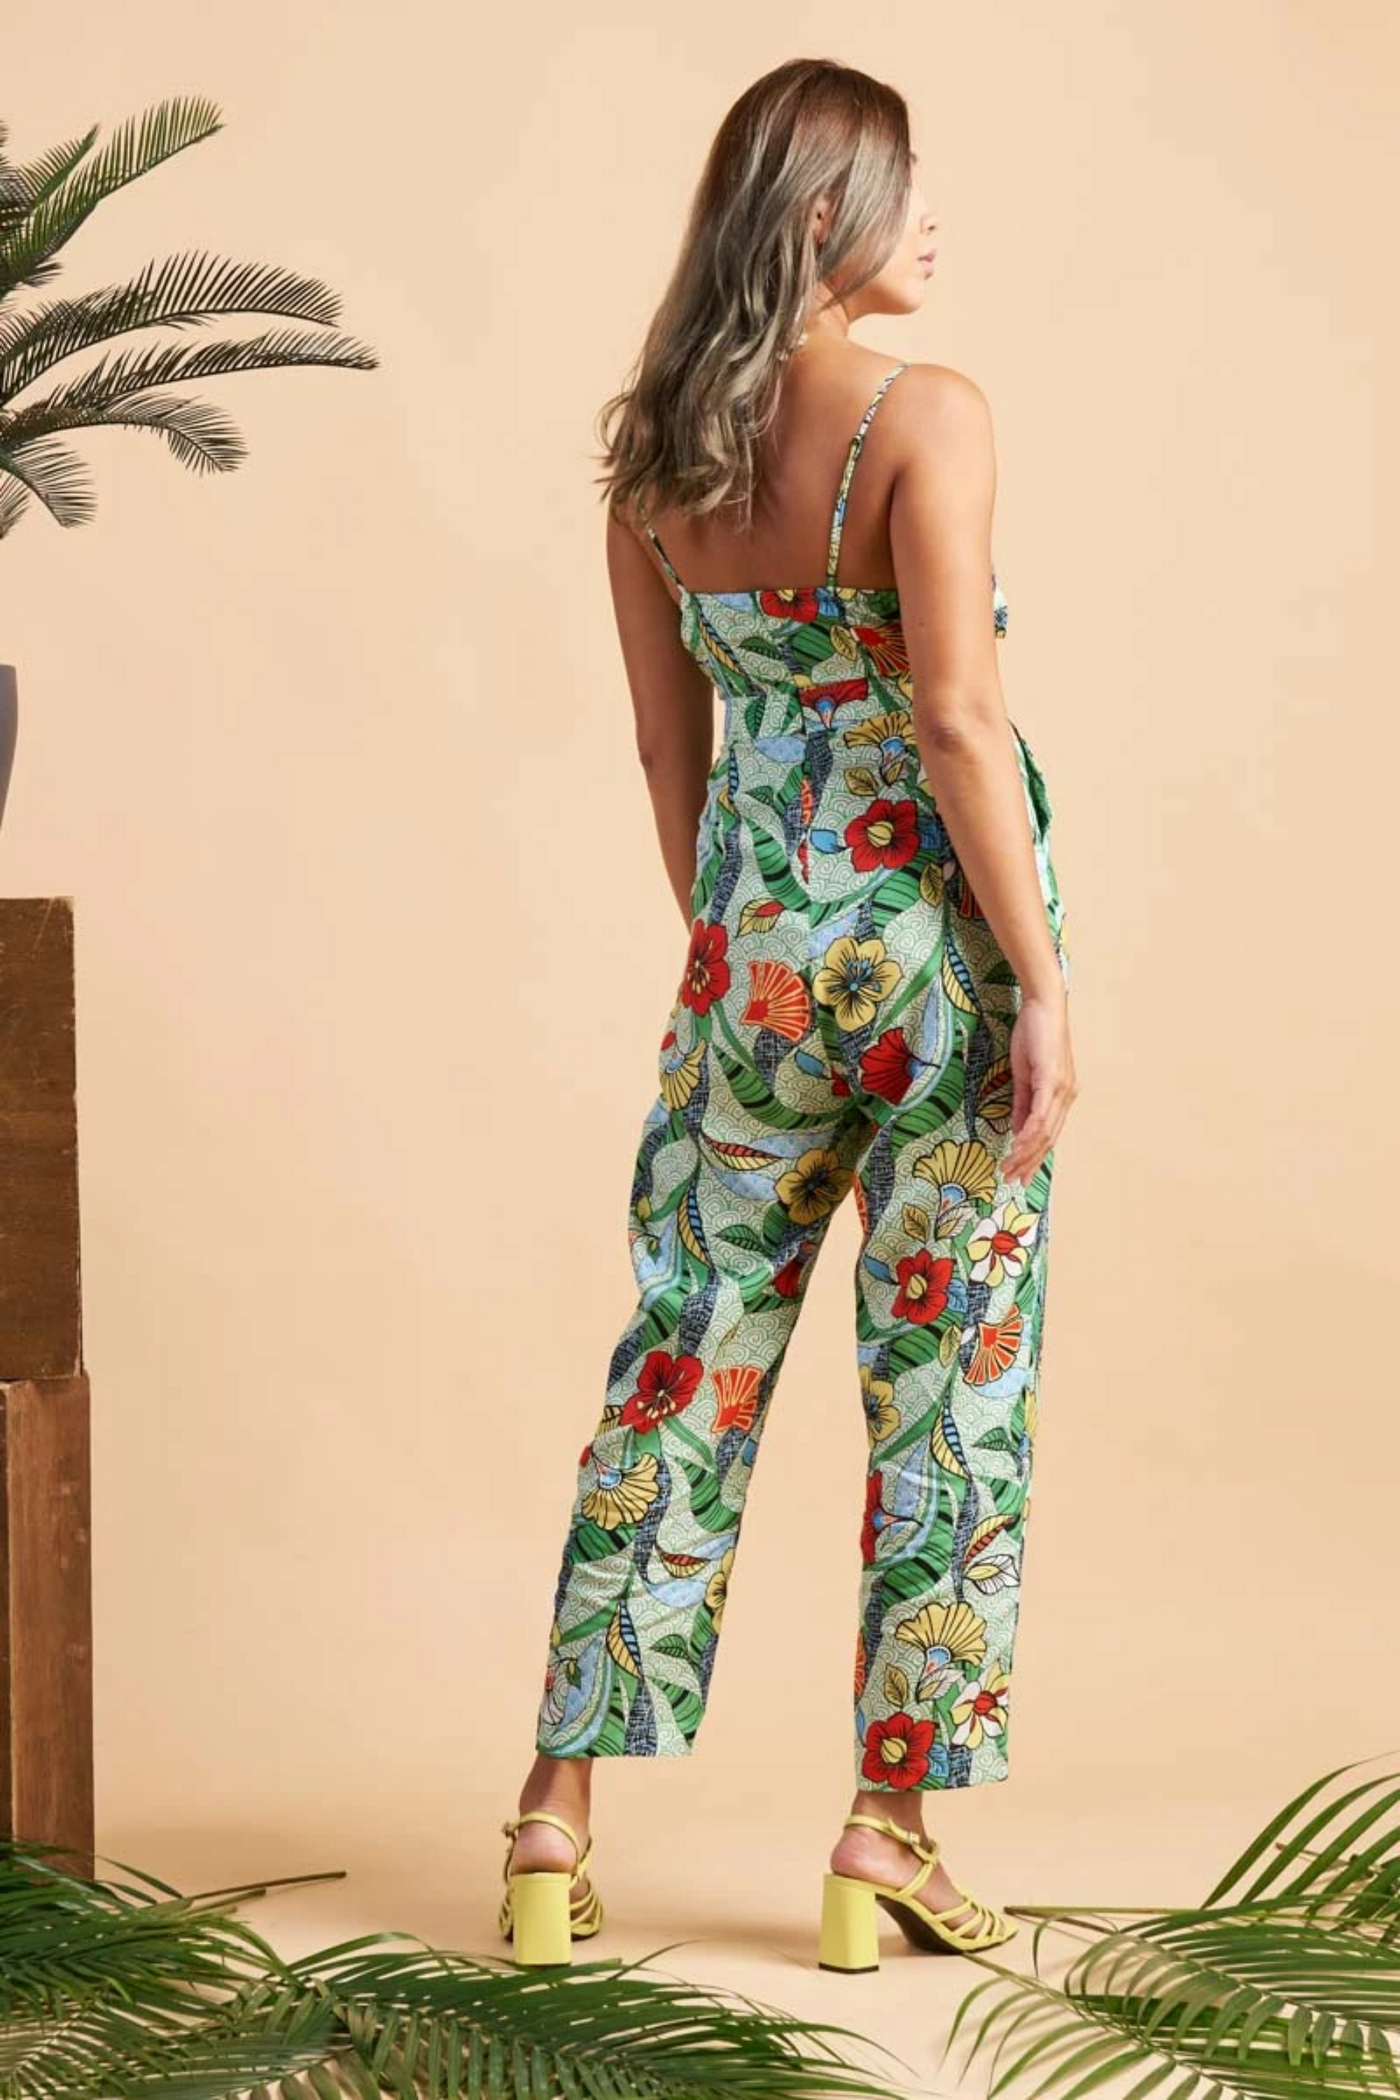 OliveAnkara Enu Tie Front Jumpsuit, available on ZERRIN with free Singapore shipping